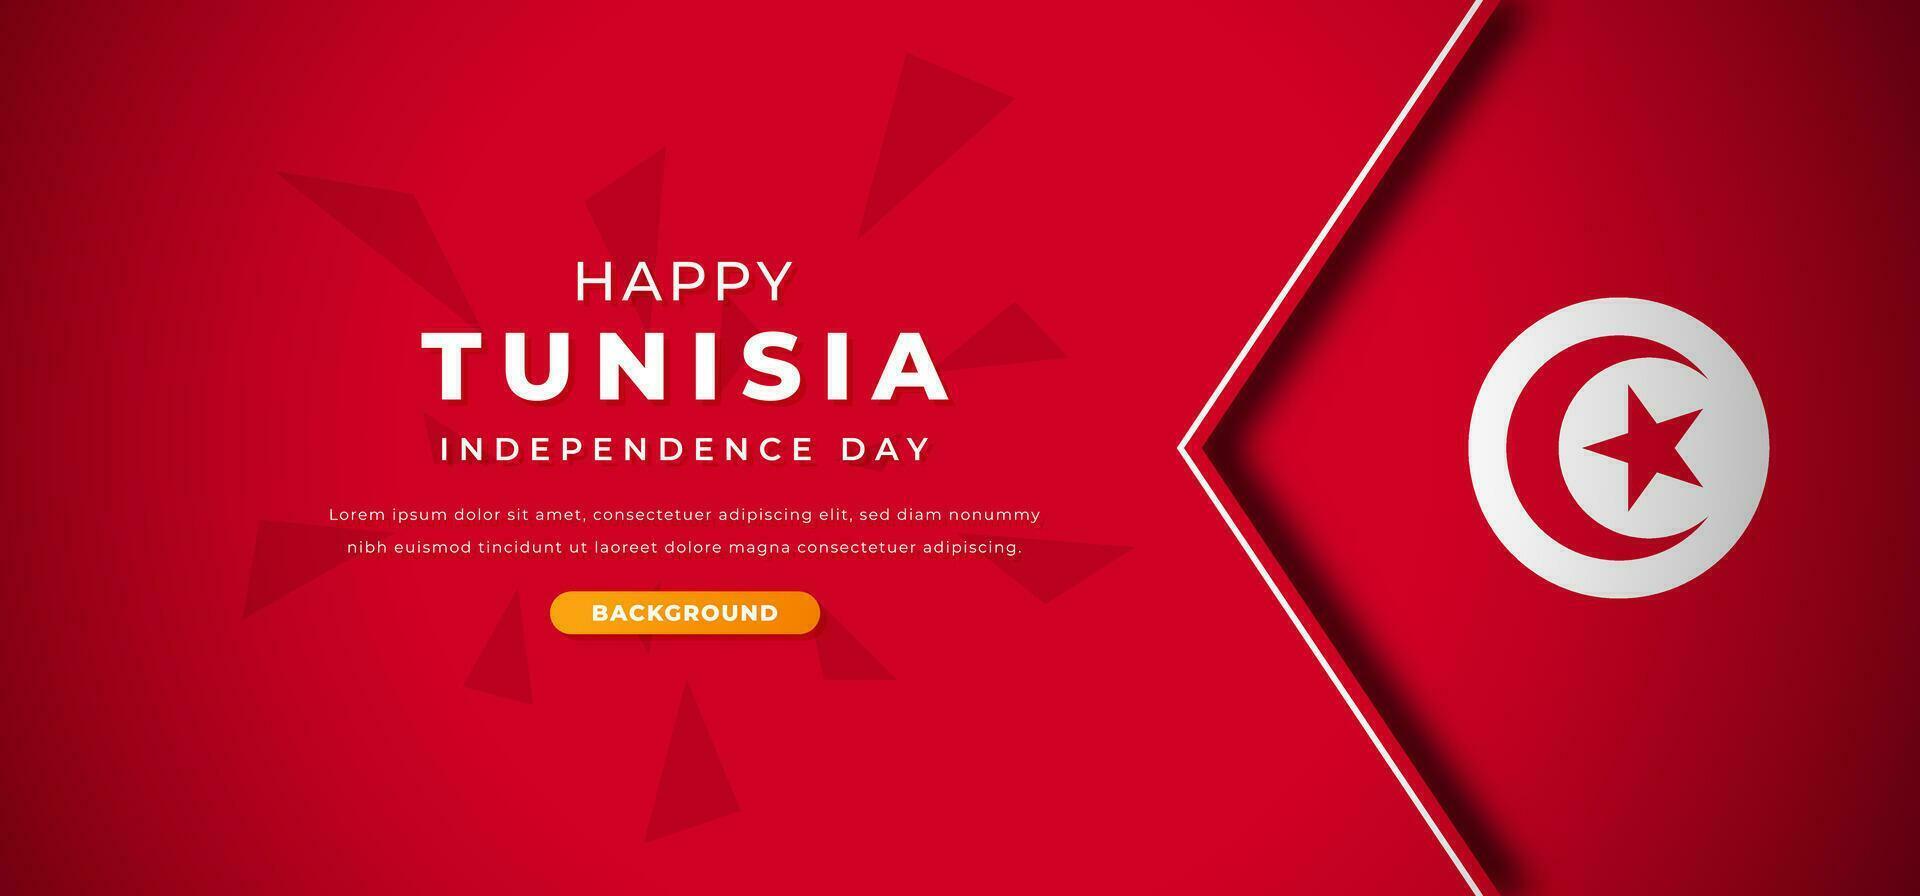 Happy Tunisia Independence Day Design Paper Cut Shapes Background Illustration for Poster, Banner, Advertising, Greeting Card vector